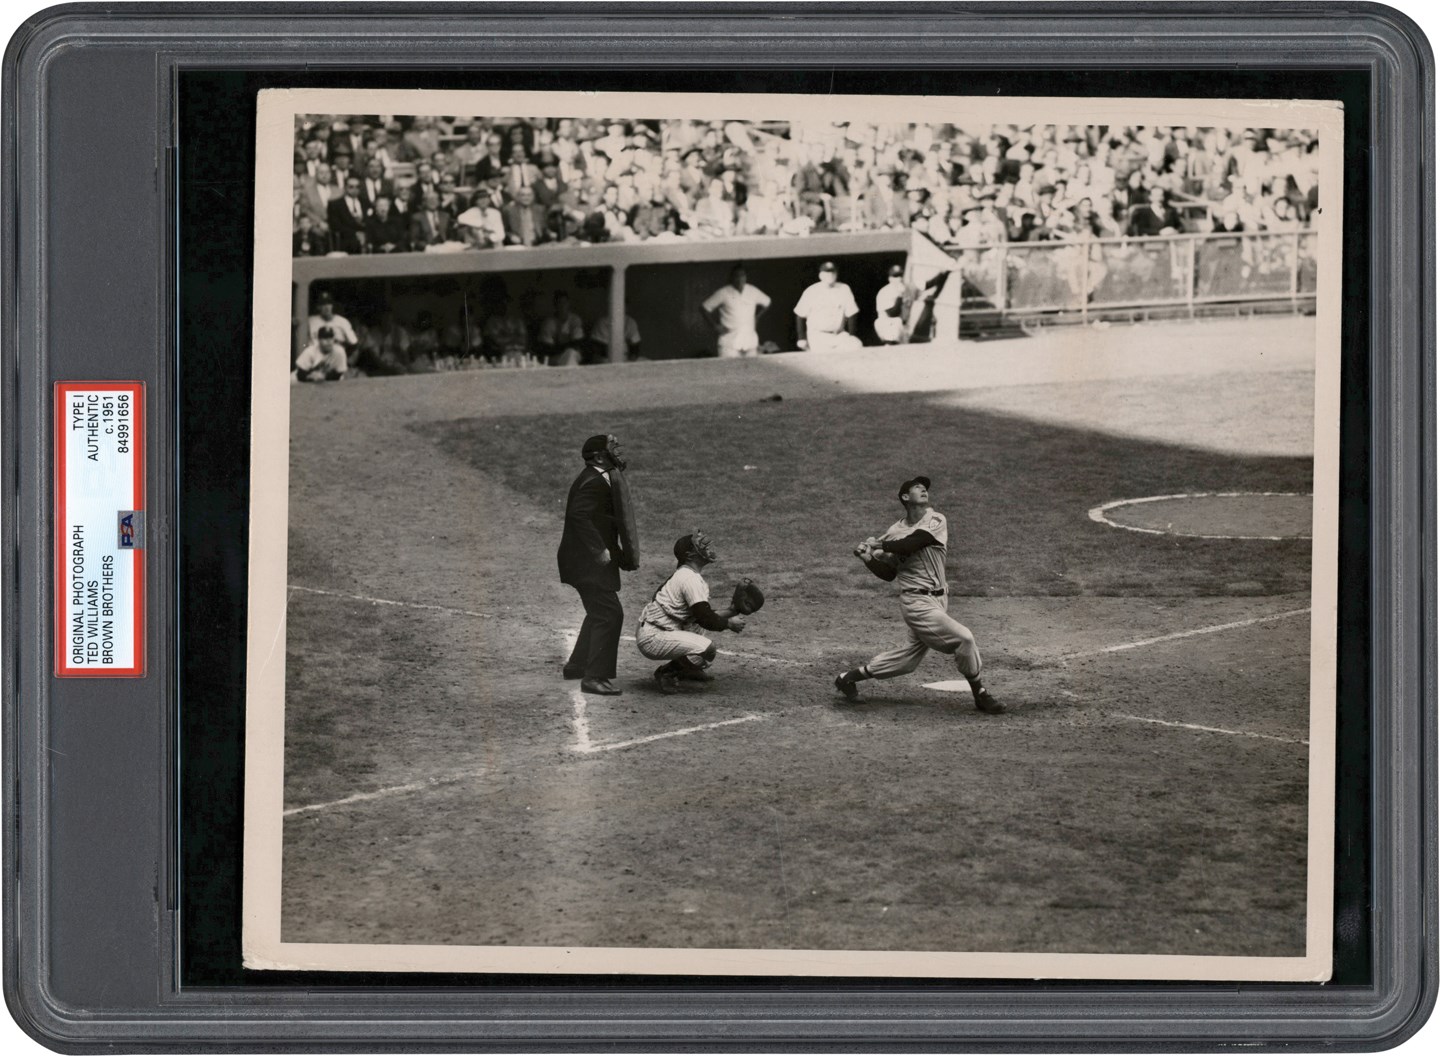 - 1951 Ted Williams Photograph (PSA Type I)